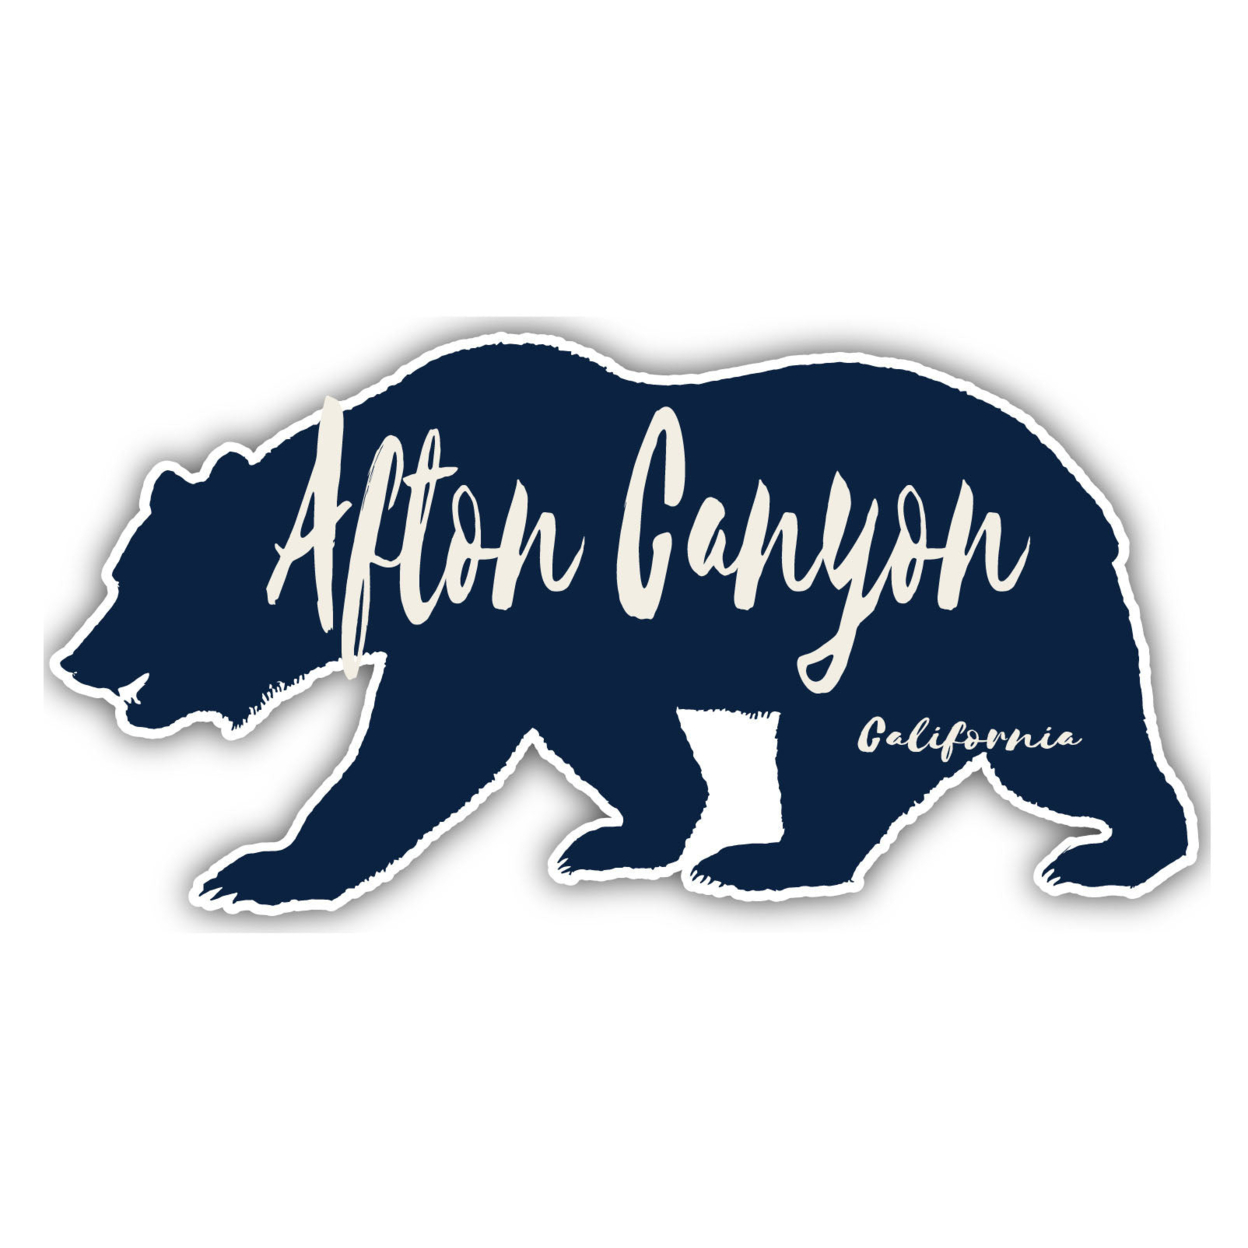 Afton Canyon California Souvenir Decorative Stickers (Choose Theme And Size) - 4-Pack, 4-Inch, Bear